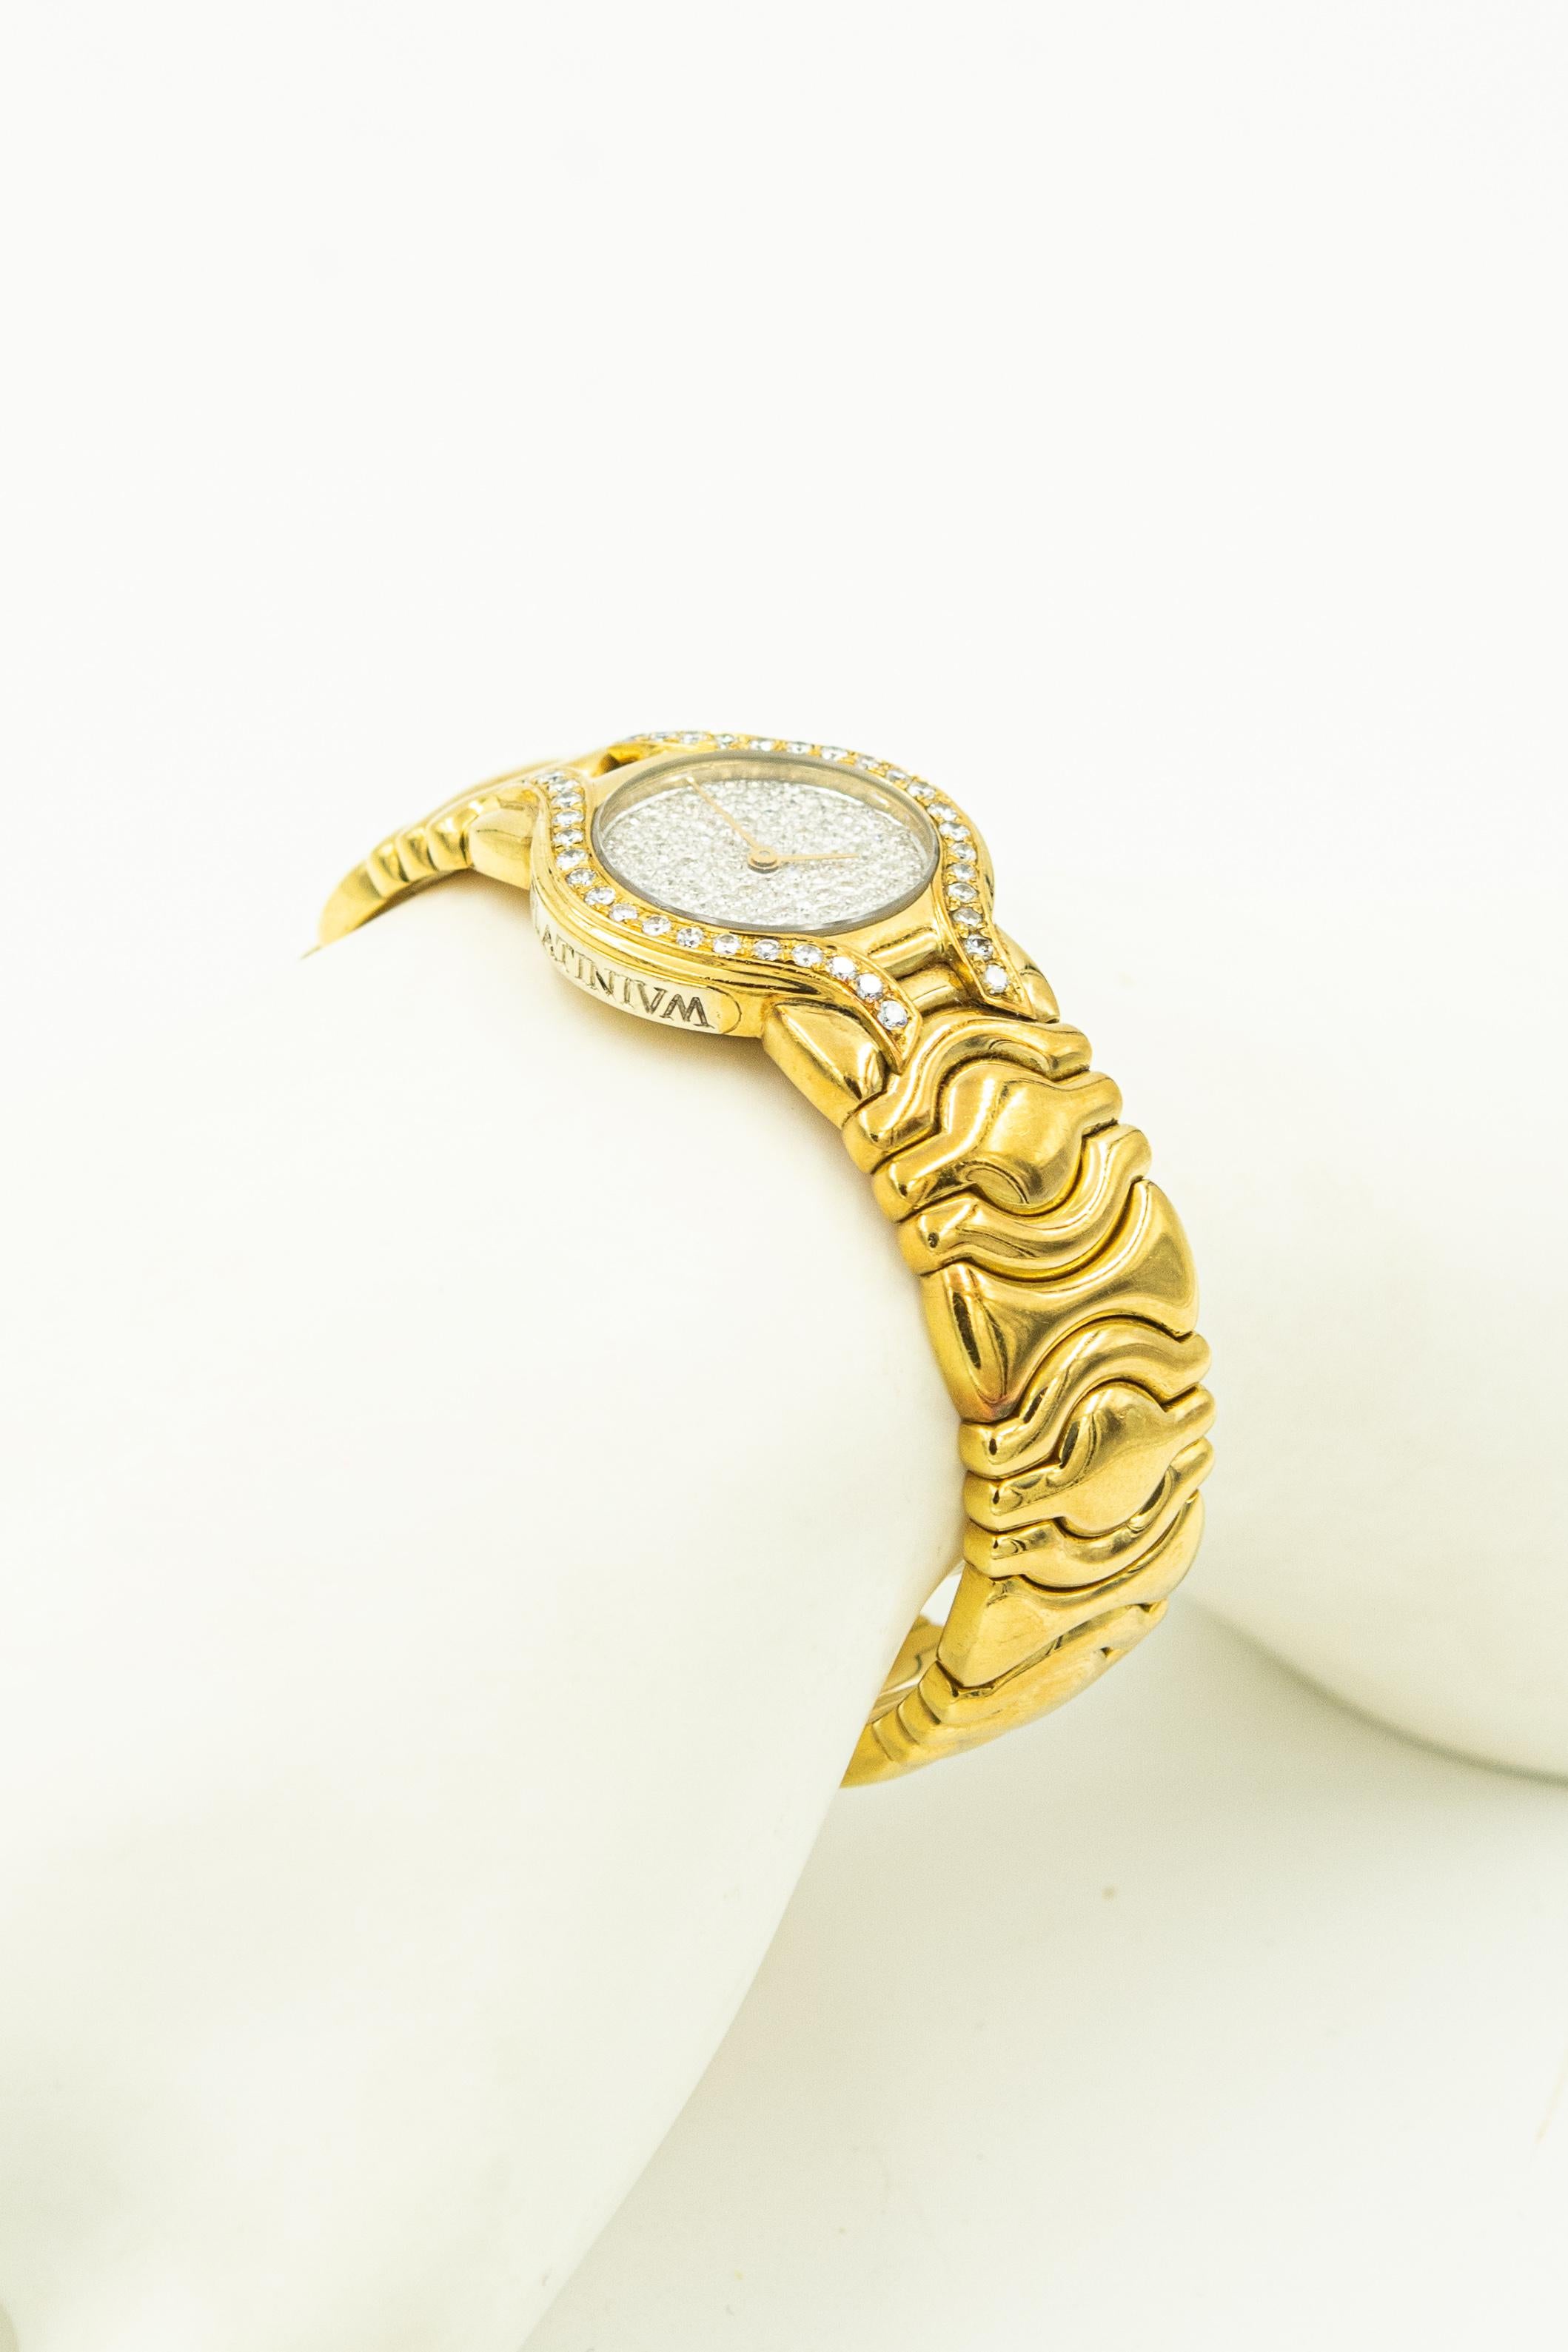 Ladies 18k Yellow Gold Platinum Cuff Watch with Diamond Face and Bezel 3